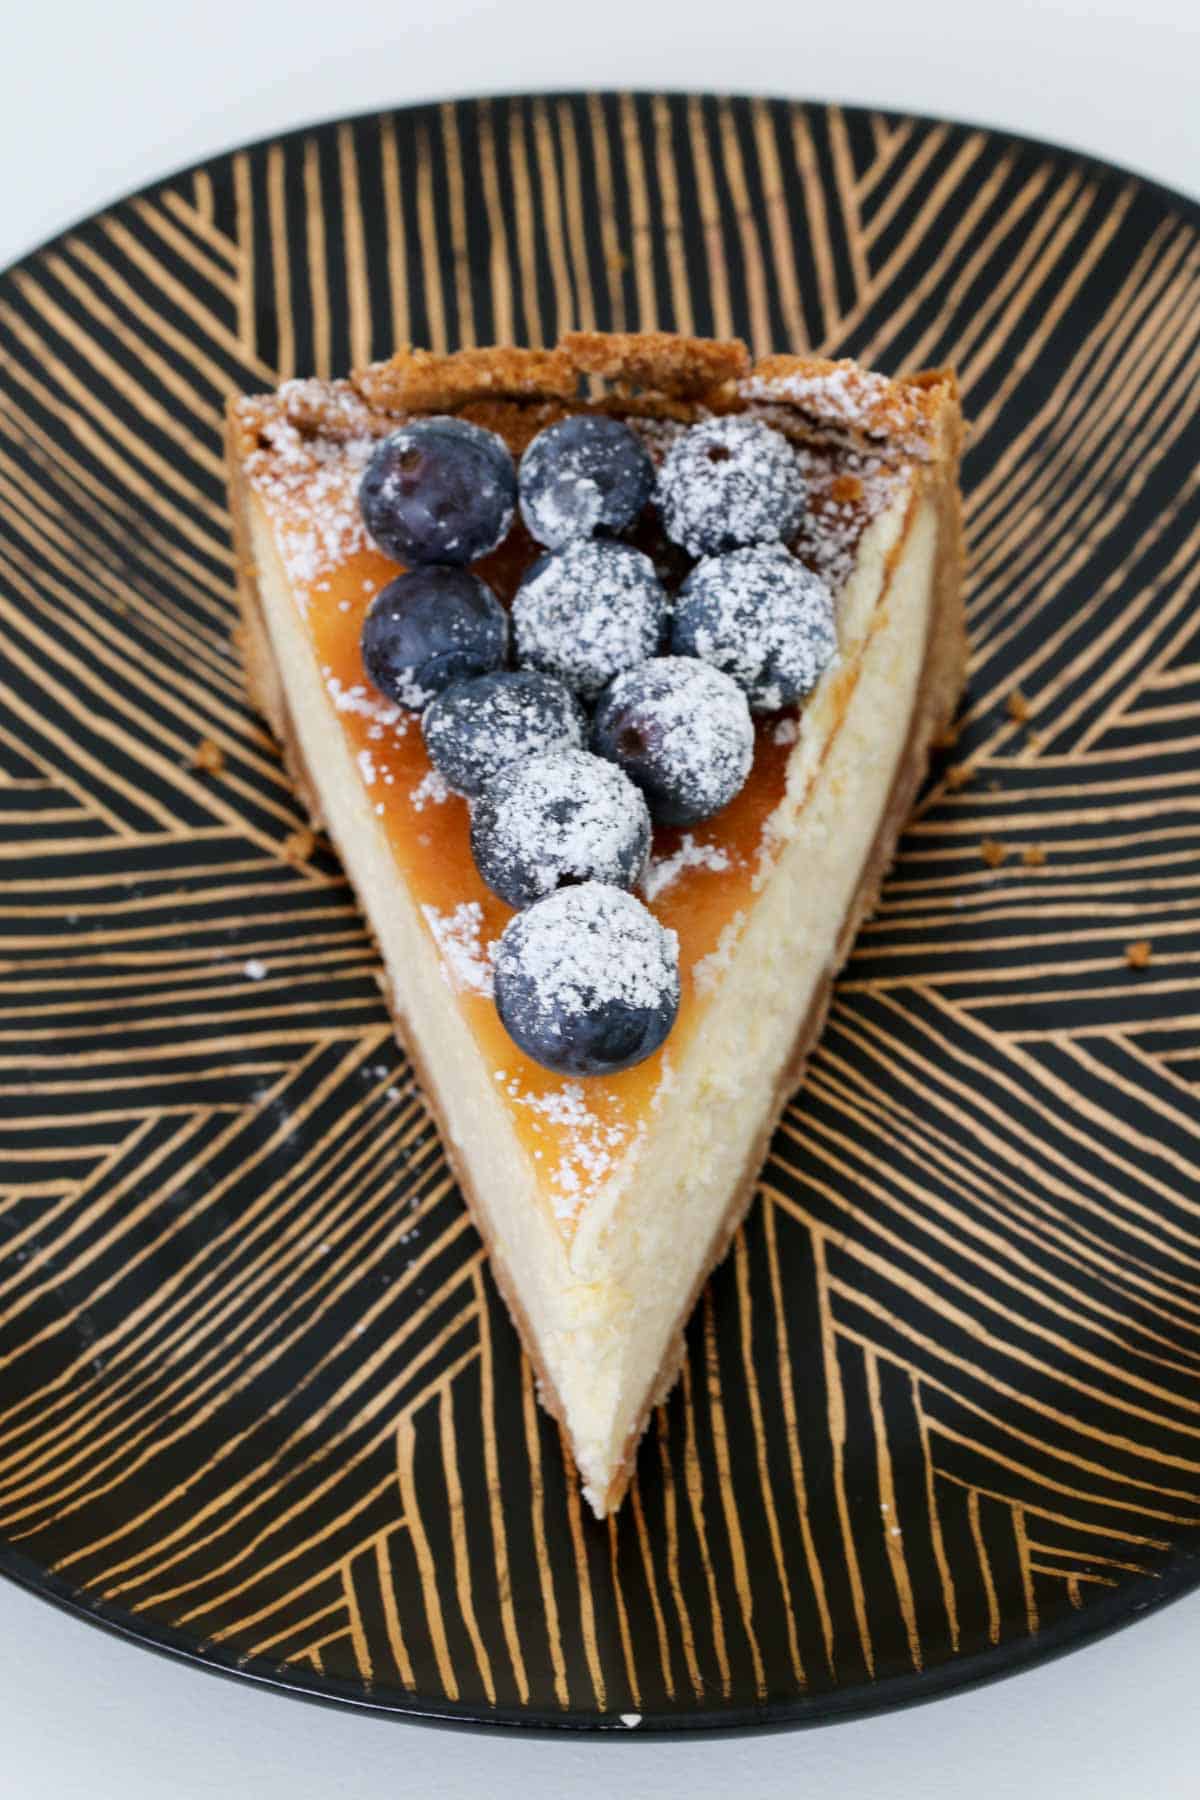 An overhead shot of a piece of baked cheesecake with blueberries on top.